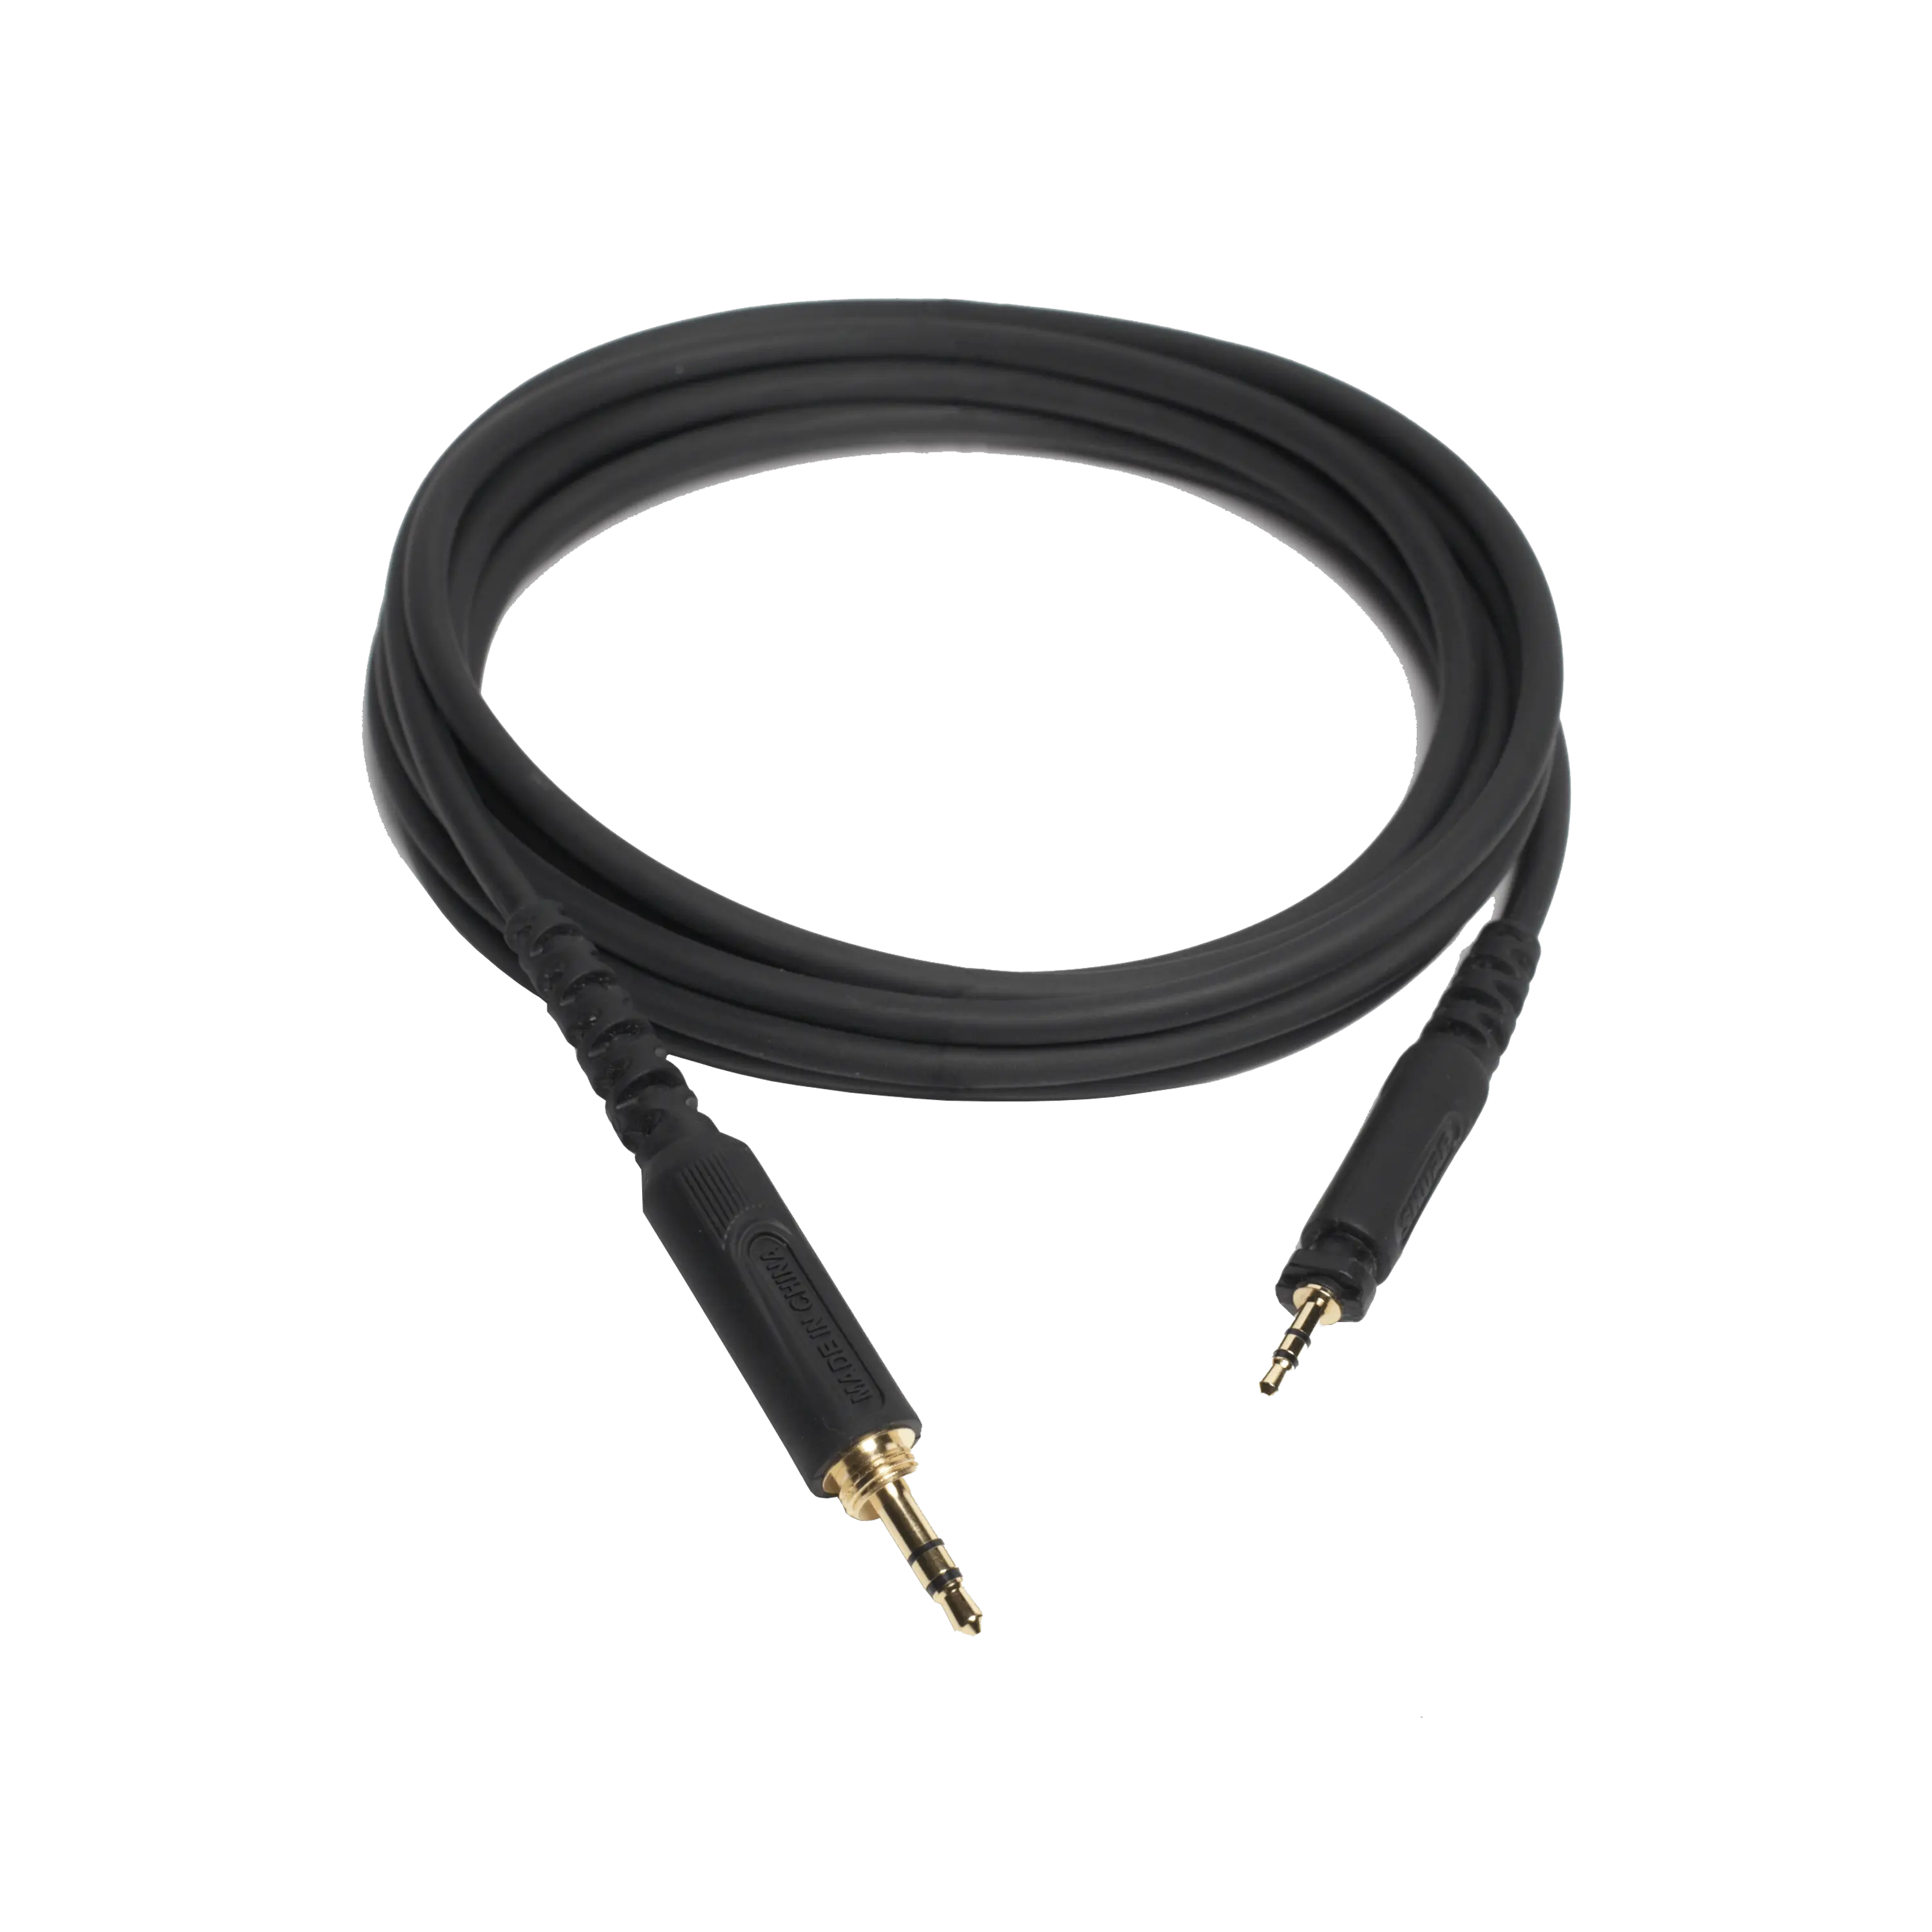 HPASCA1 2,5 m straight headphone cable